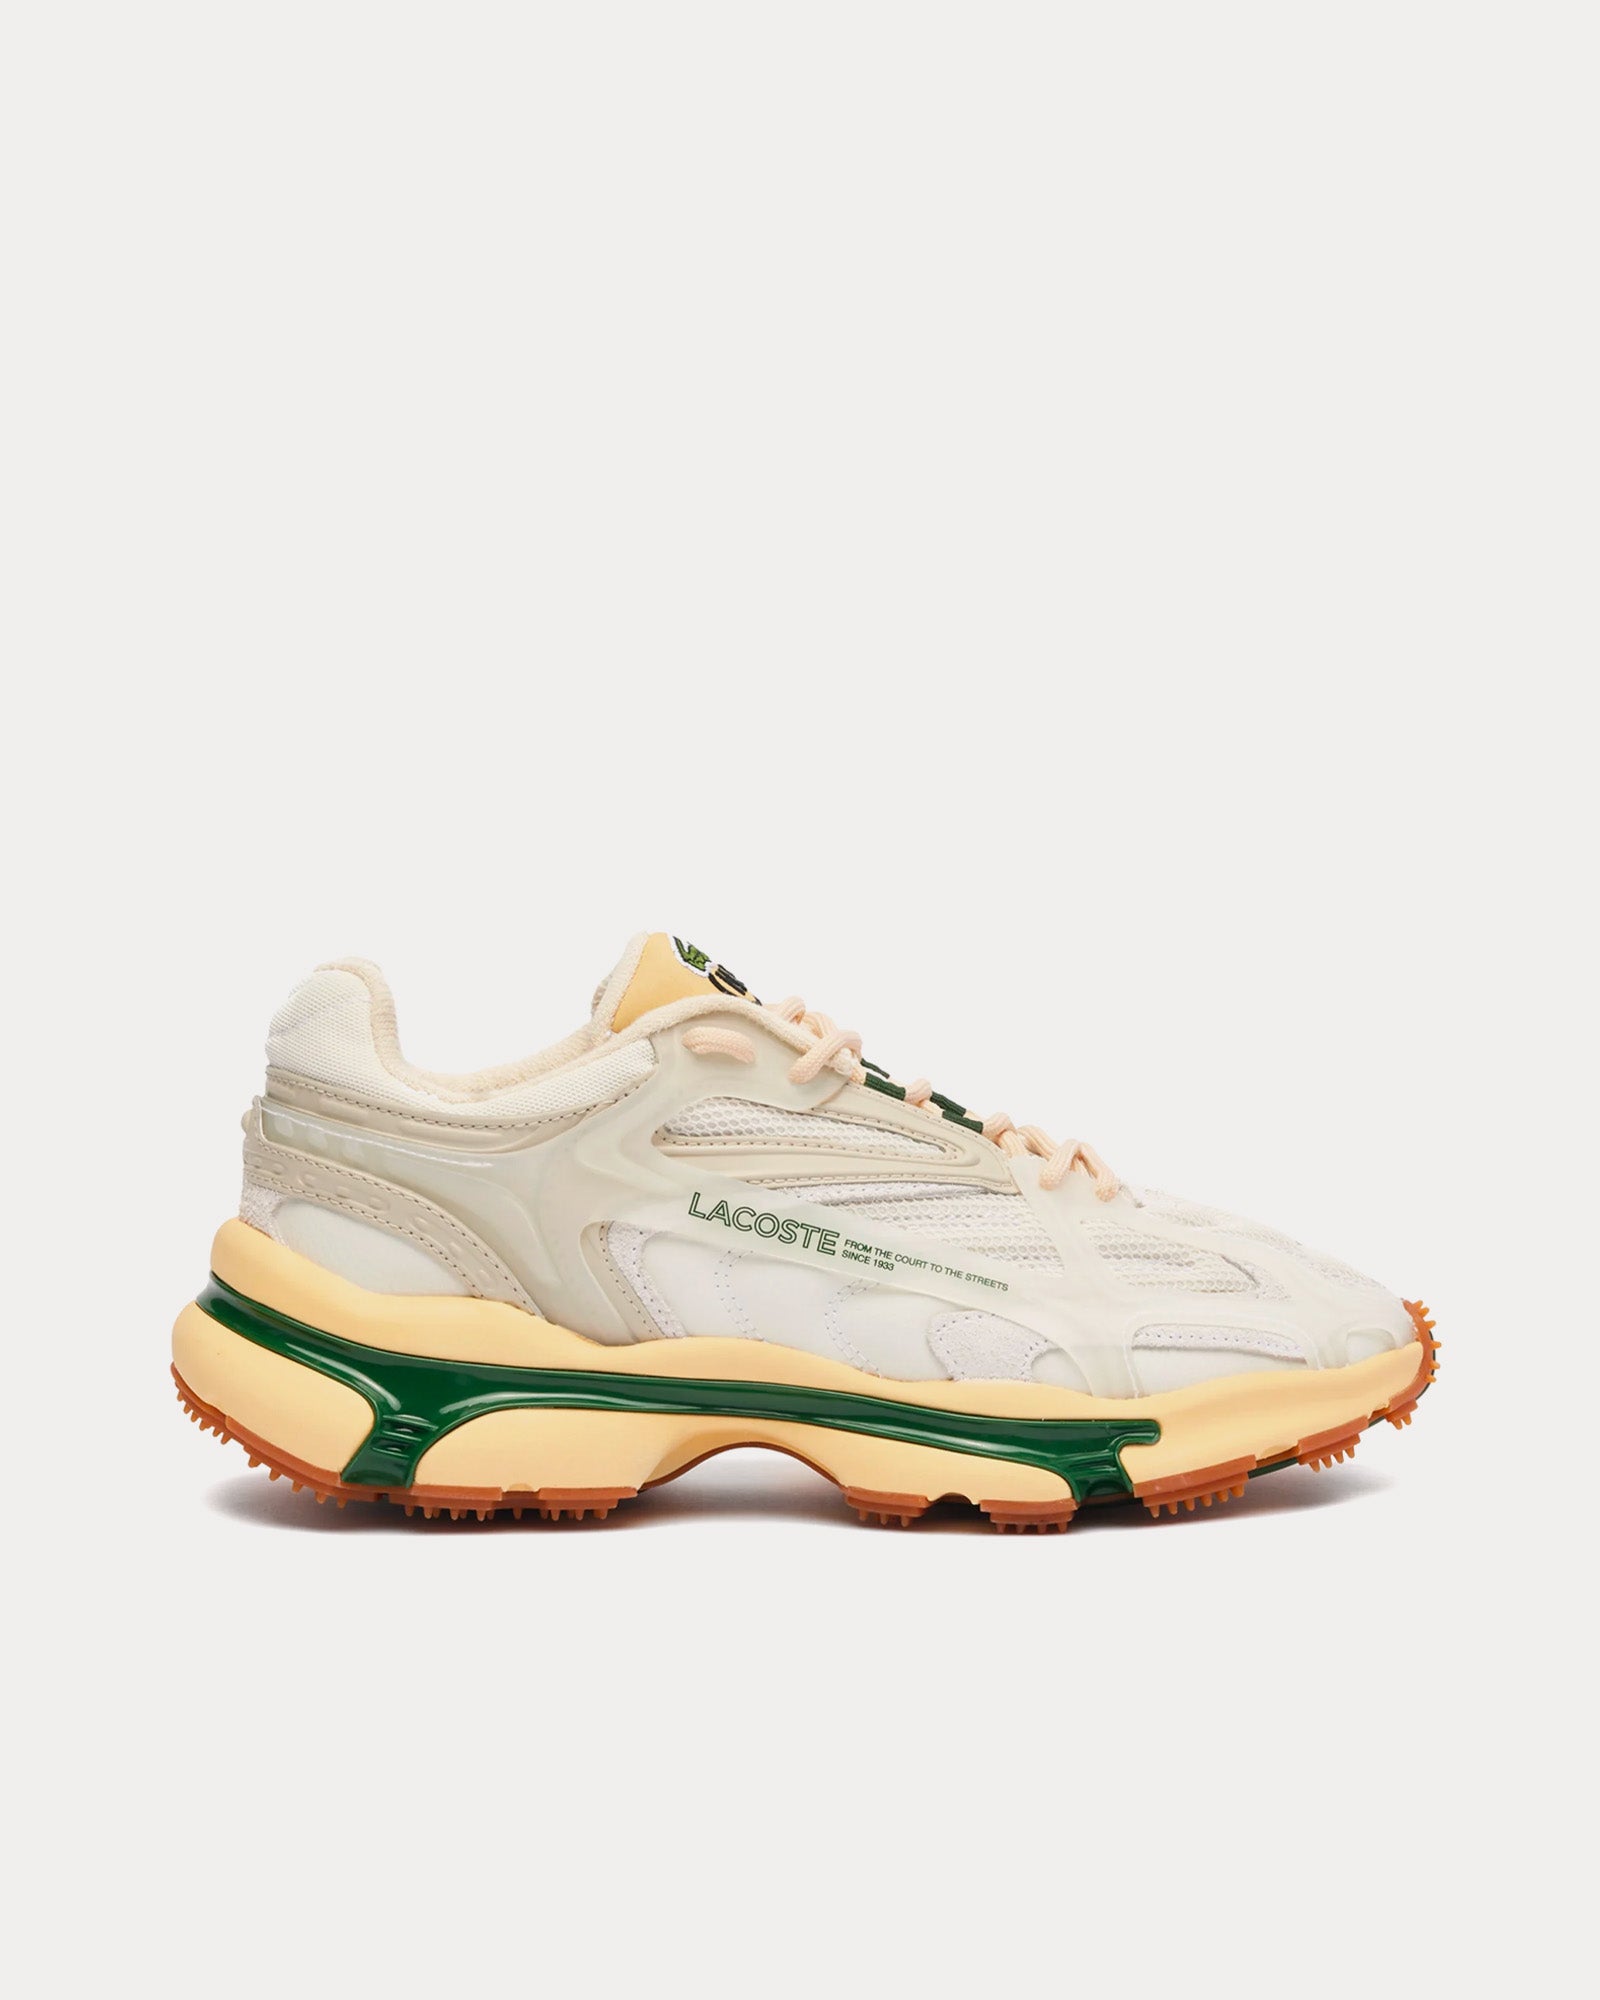 Lacoste x Highsnobiety - L003 2K24 White / Eggshell / Green Low Top Sneakers